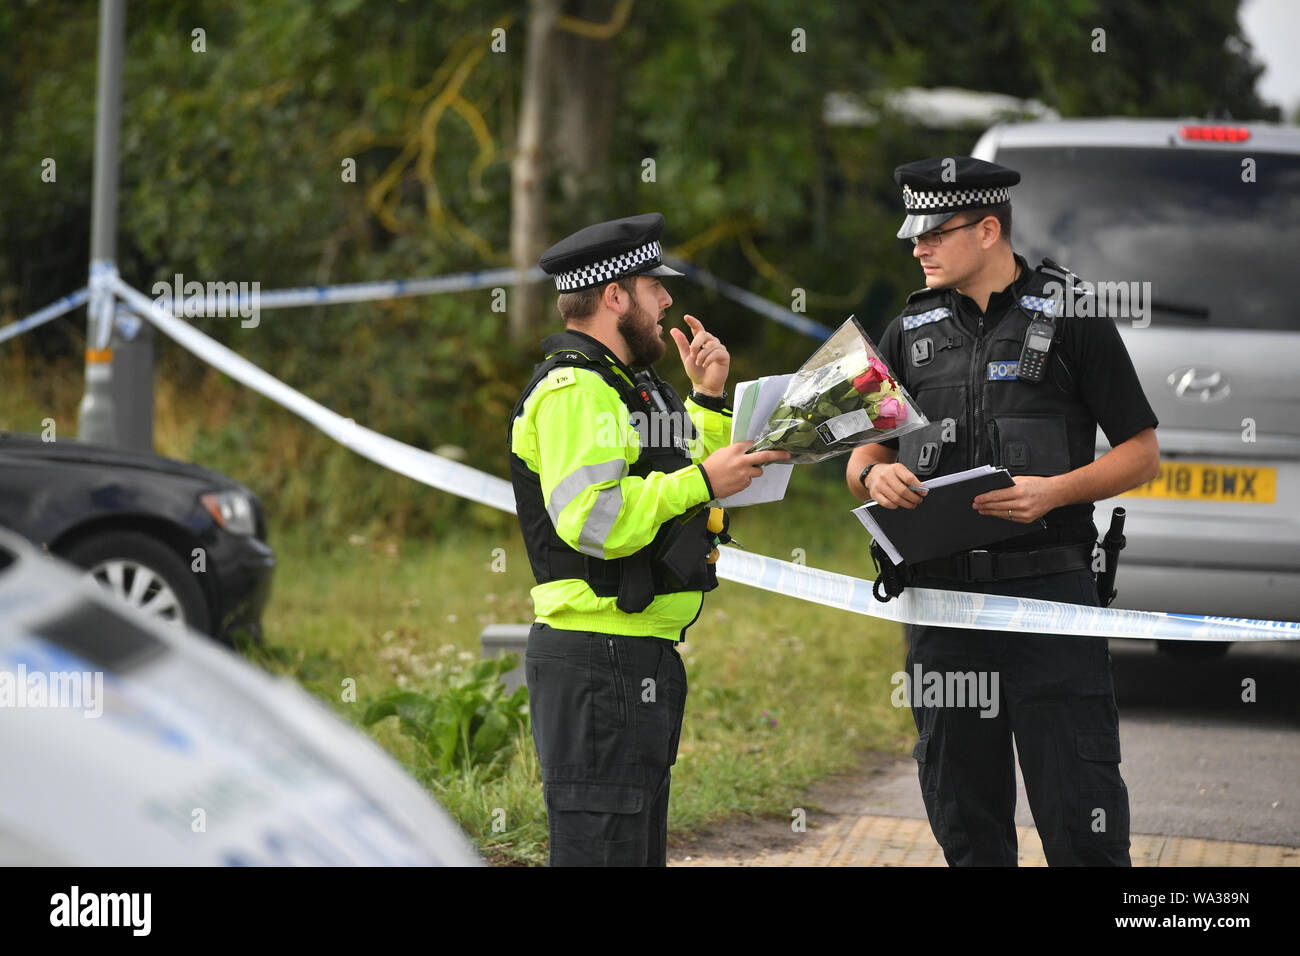 A police officer holds a floral tribute at the scene, where Thames Valley Police officer Pc Andrew Harper, 28, died following a 'serious incident' at about 11.30pm on Thursday near the A4 Bath Road, between Reading and Newbury, at the village of Sulhamstead in Berkshire. Stock Photo